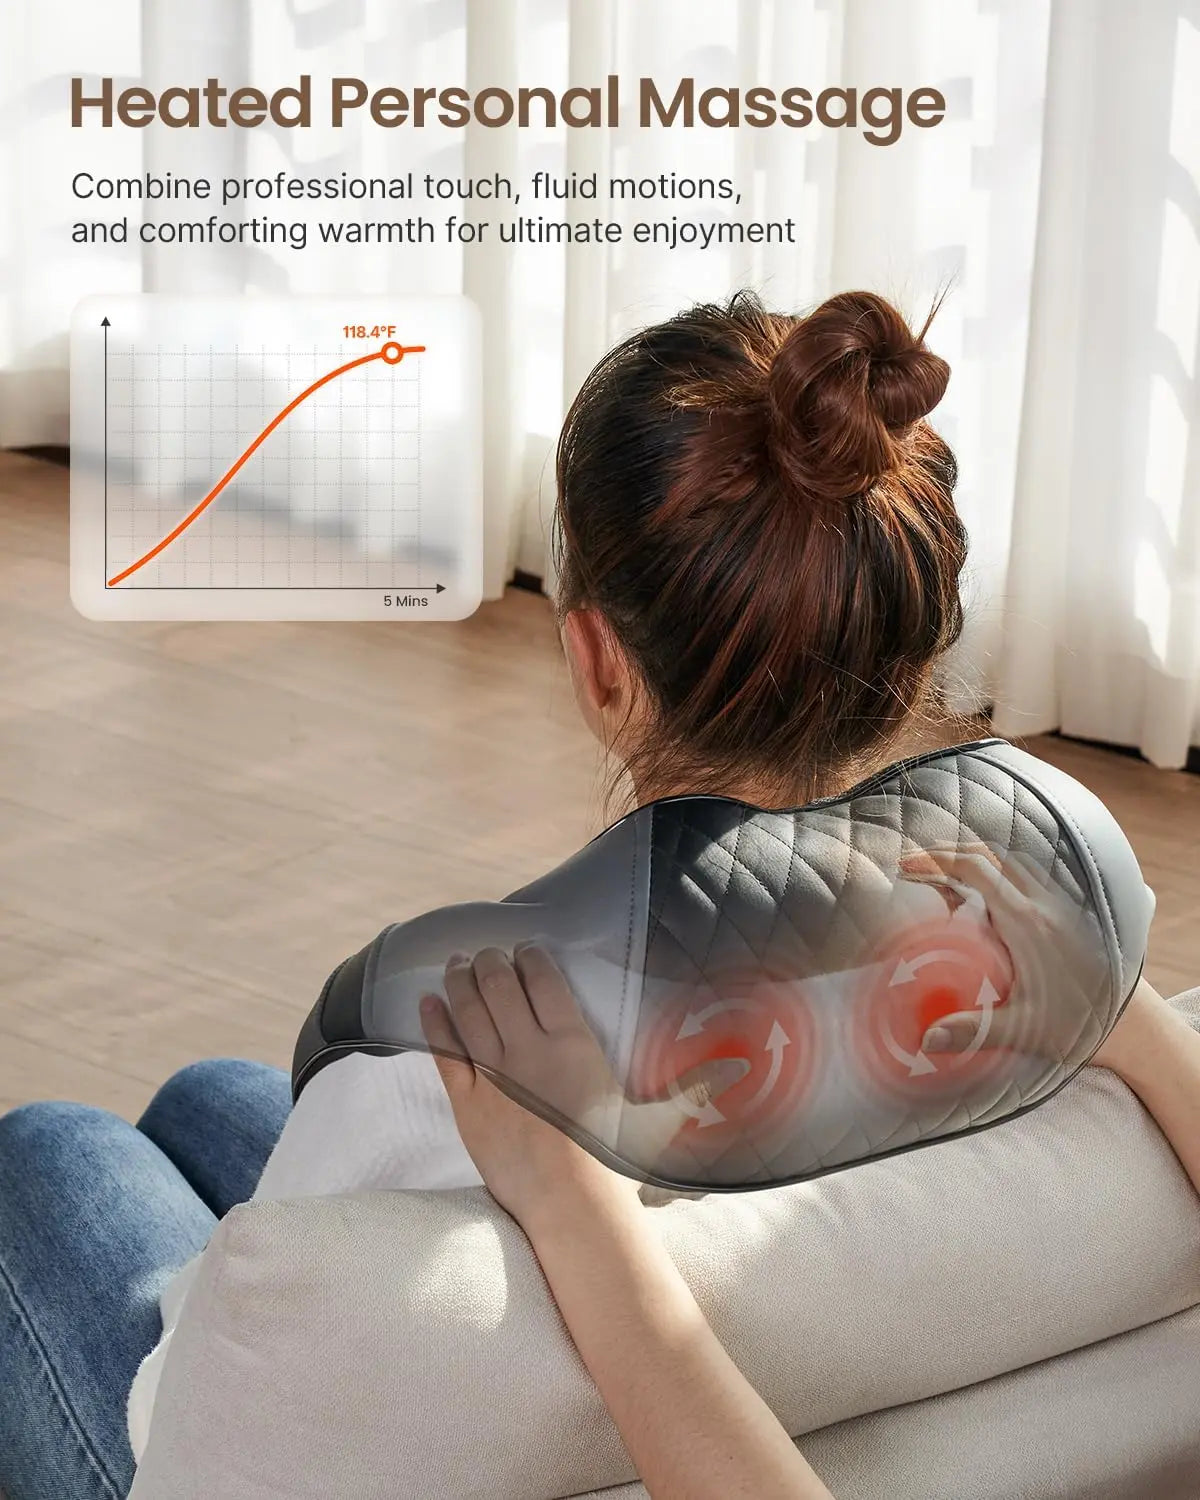 A person sits on a beige couch using a Renpho EU U-Neck 2 Neck & Shoulders Massager with red, rotating mechanisms visible through the device's translucent design. Text above reads, "Heated Personal Massage." An inset graph shows temperature rise over 5 minutes, labeled "65±5℃" for "Heat" and "Time.